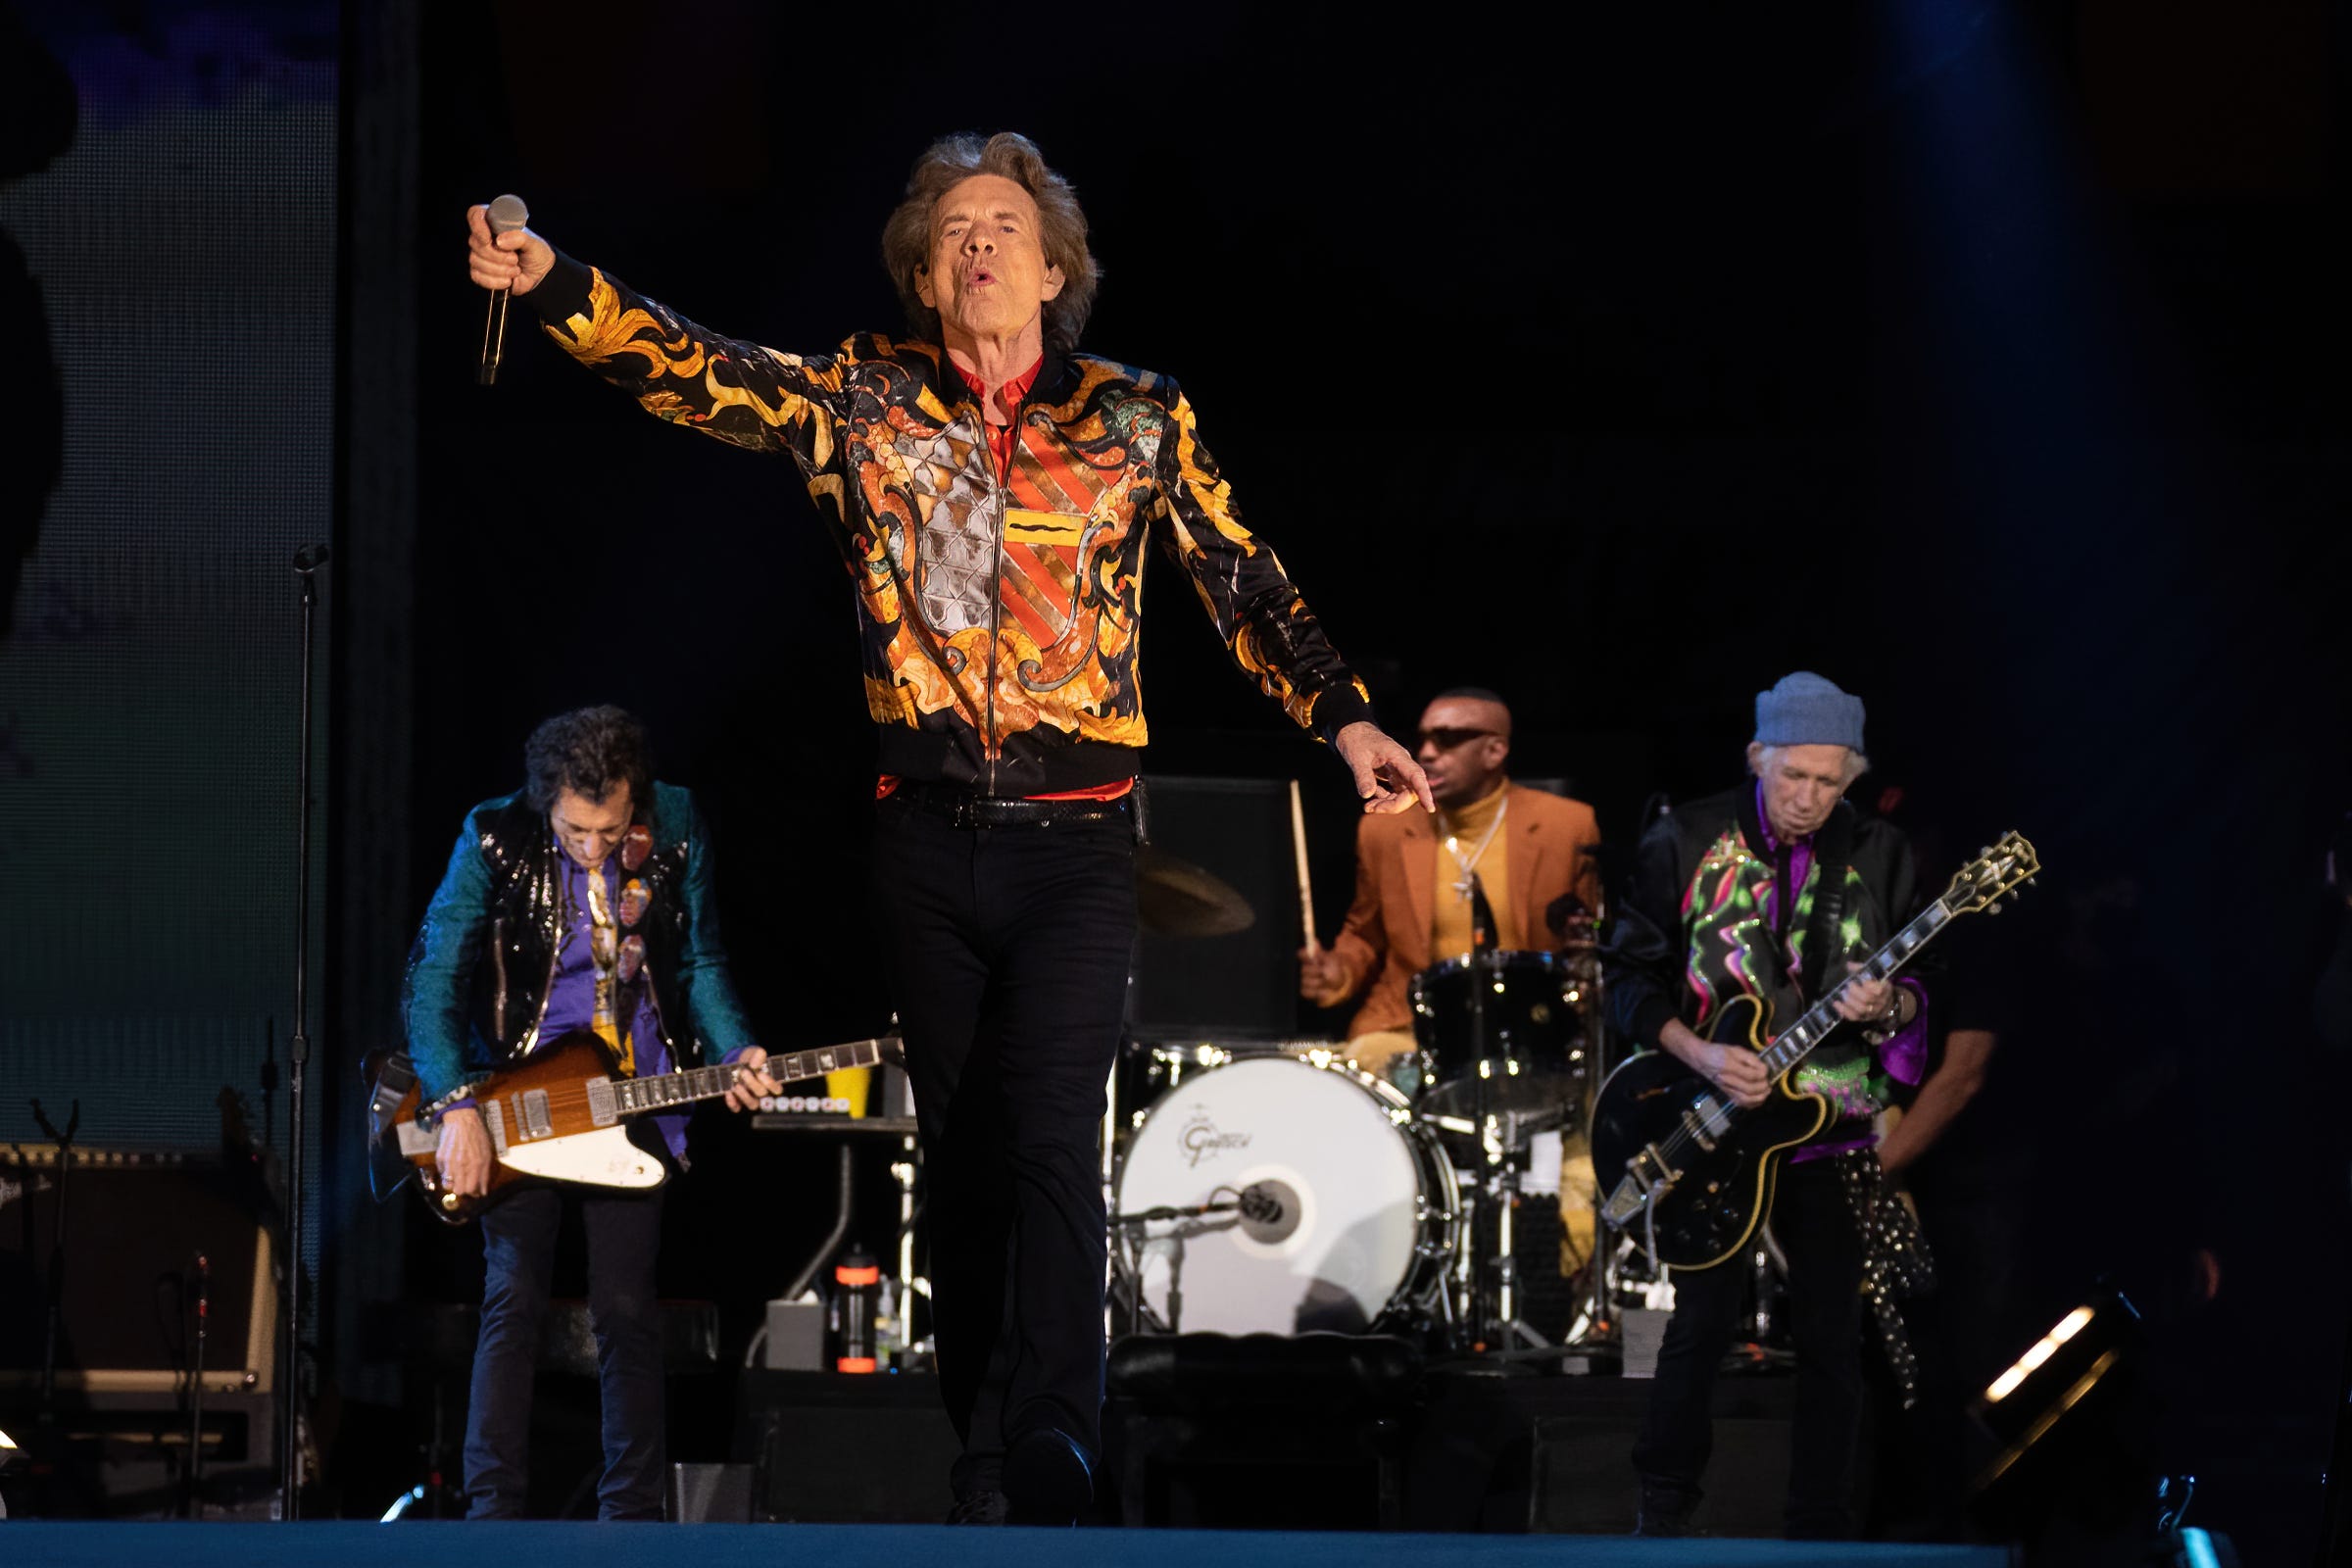 Ron Wood, Mick Jagger, Steve Jordan and Keith Richards of The Rolling Stones perform in support of their "No Filter Tour" at the Super Stage at Circuit of The Americas on November 20, 2021 in Austin, Texas.